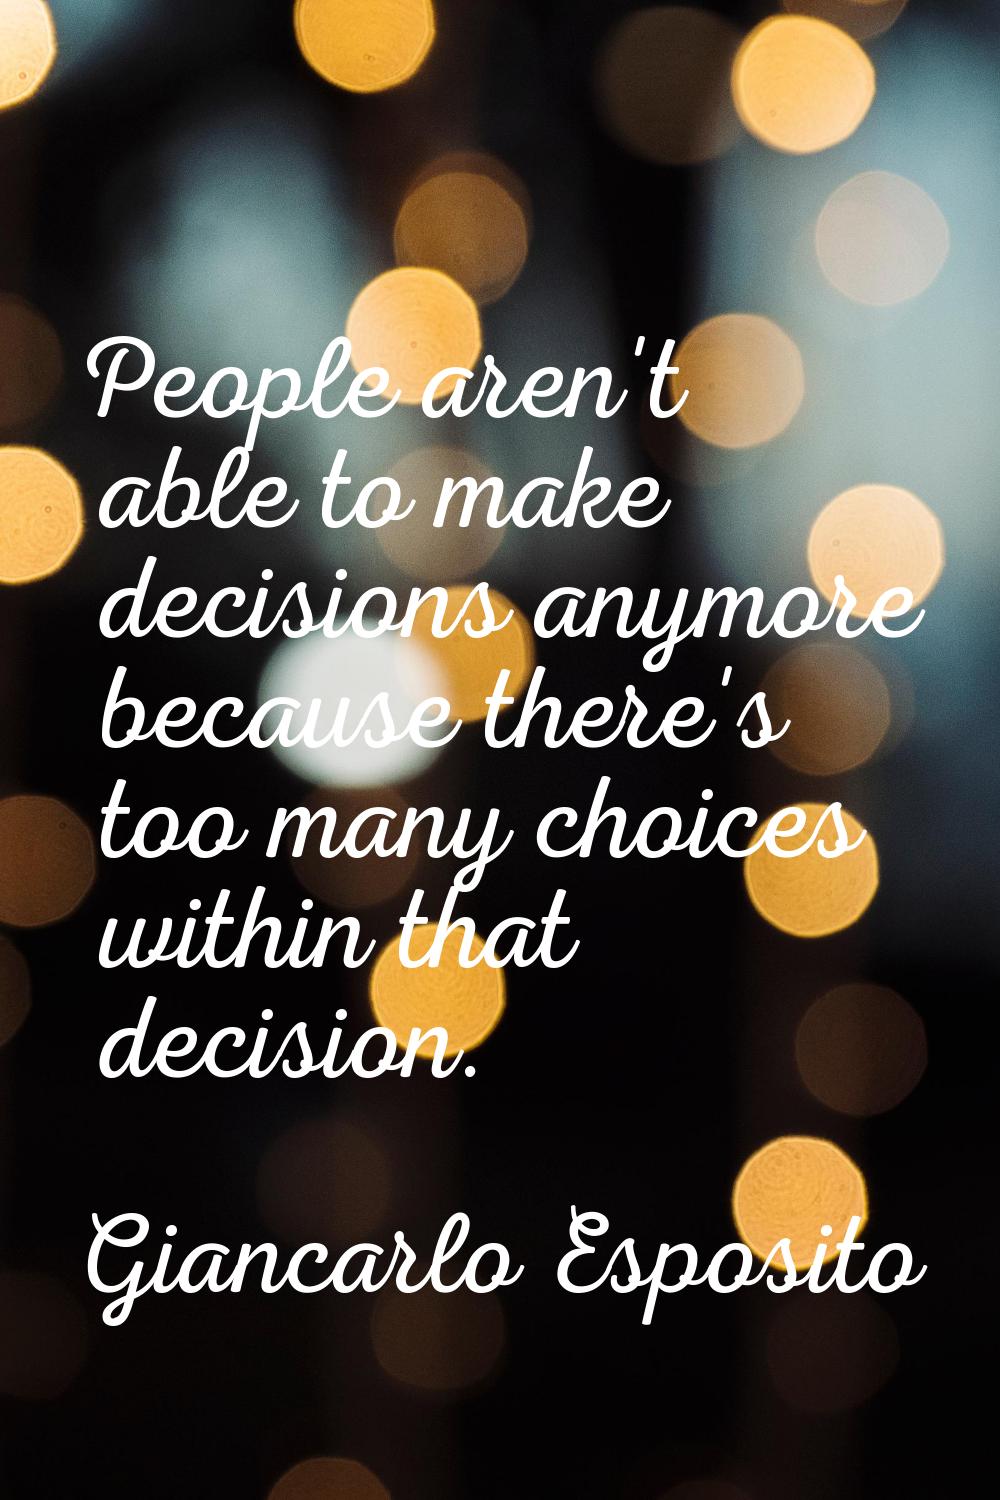 People aren't able to make decisions anymore because there's too many choices within that decision.